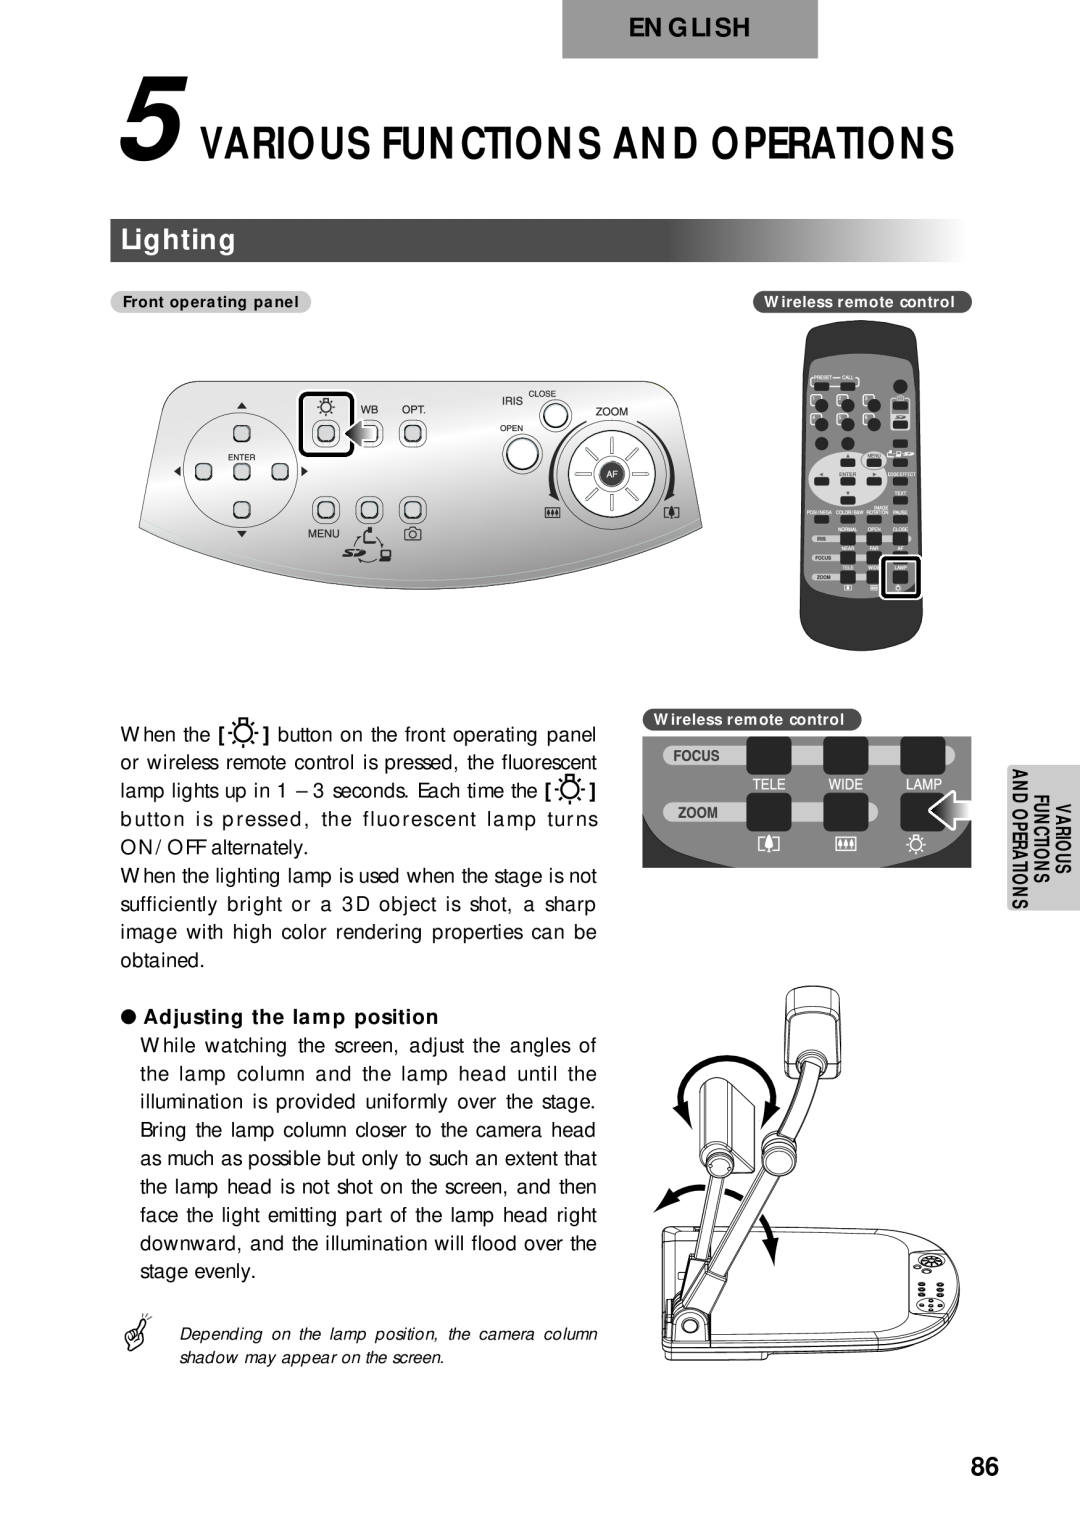 Elmo p10 instruction manual Lighting, Various Functions And Operations, English 